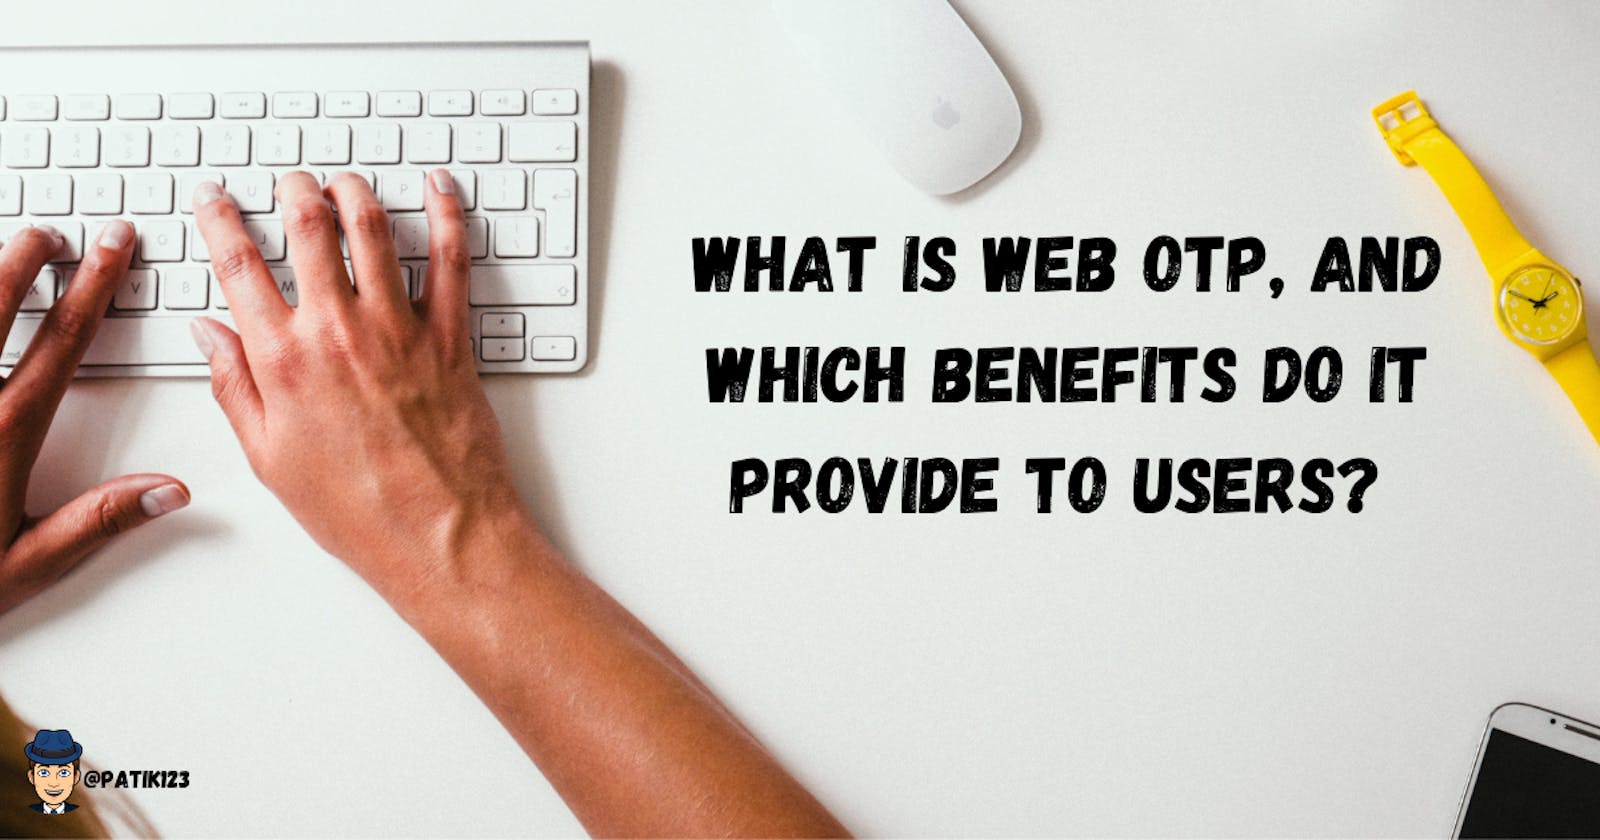 What is Web OTP, and which benefits do it provide to users?